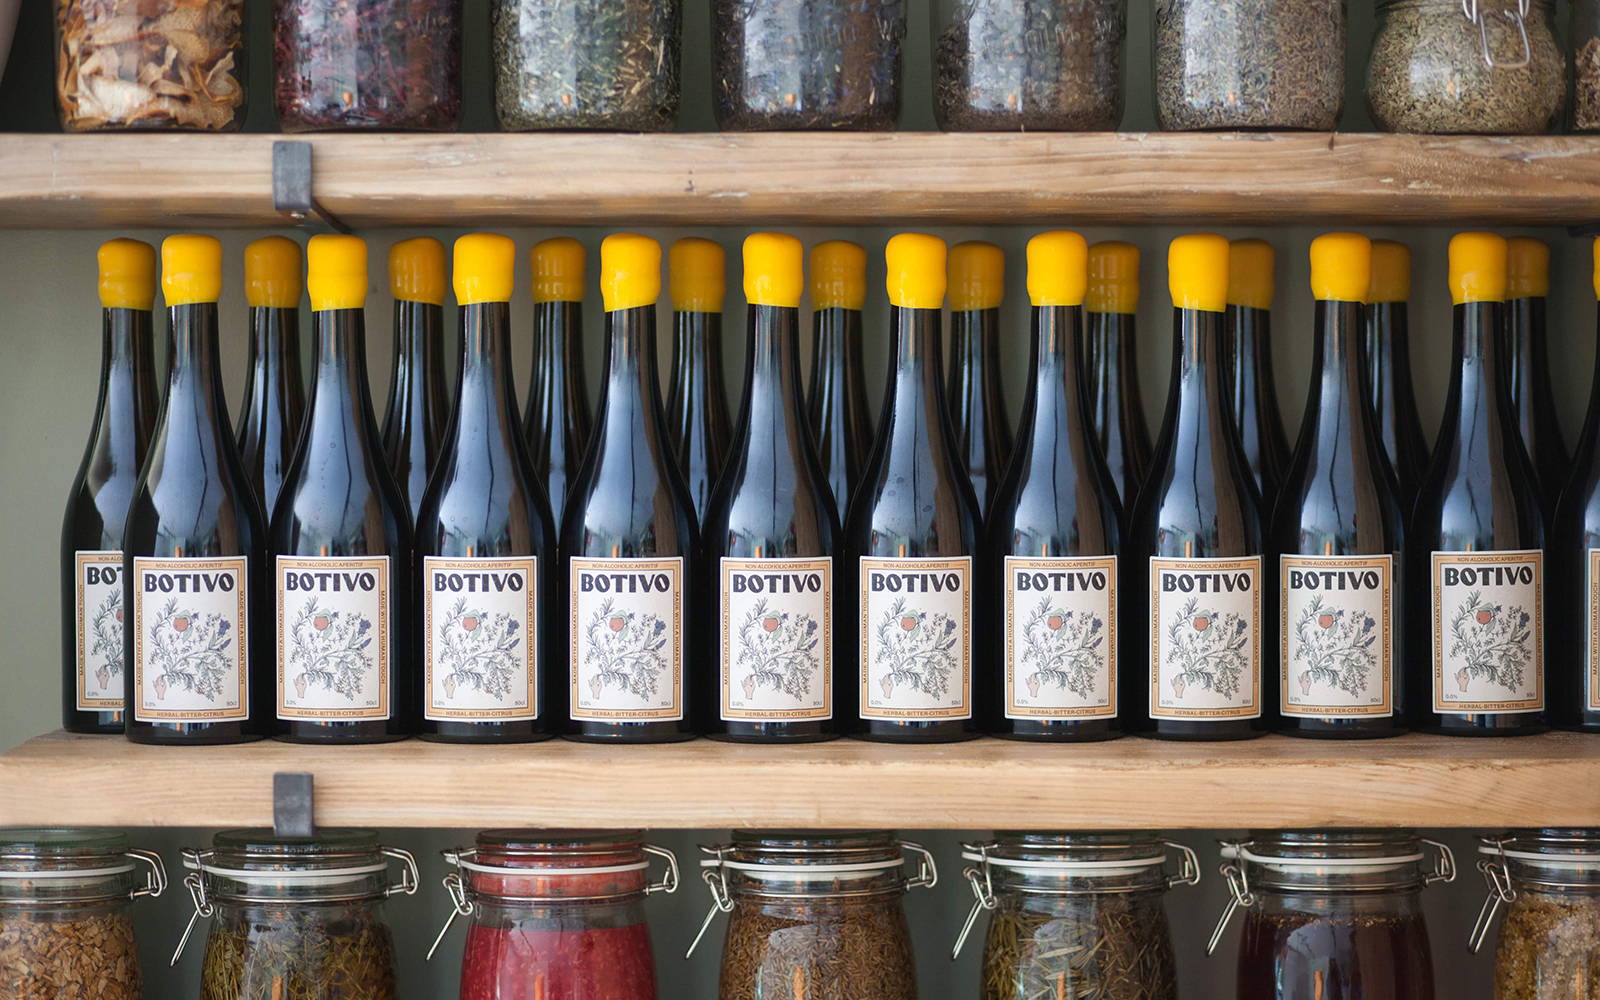 A lifestyle shot of multiple Botivo bottles sitting on a shelf amongst herbs and spices.